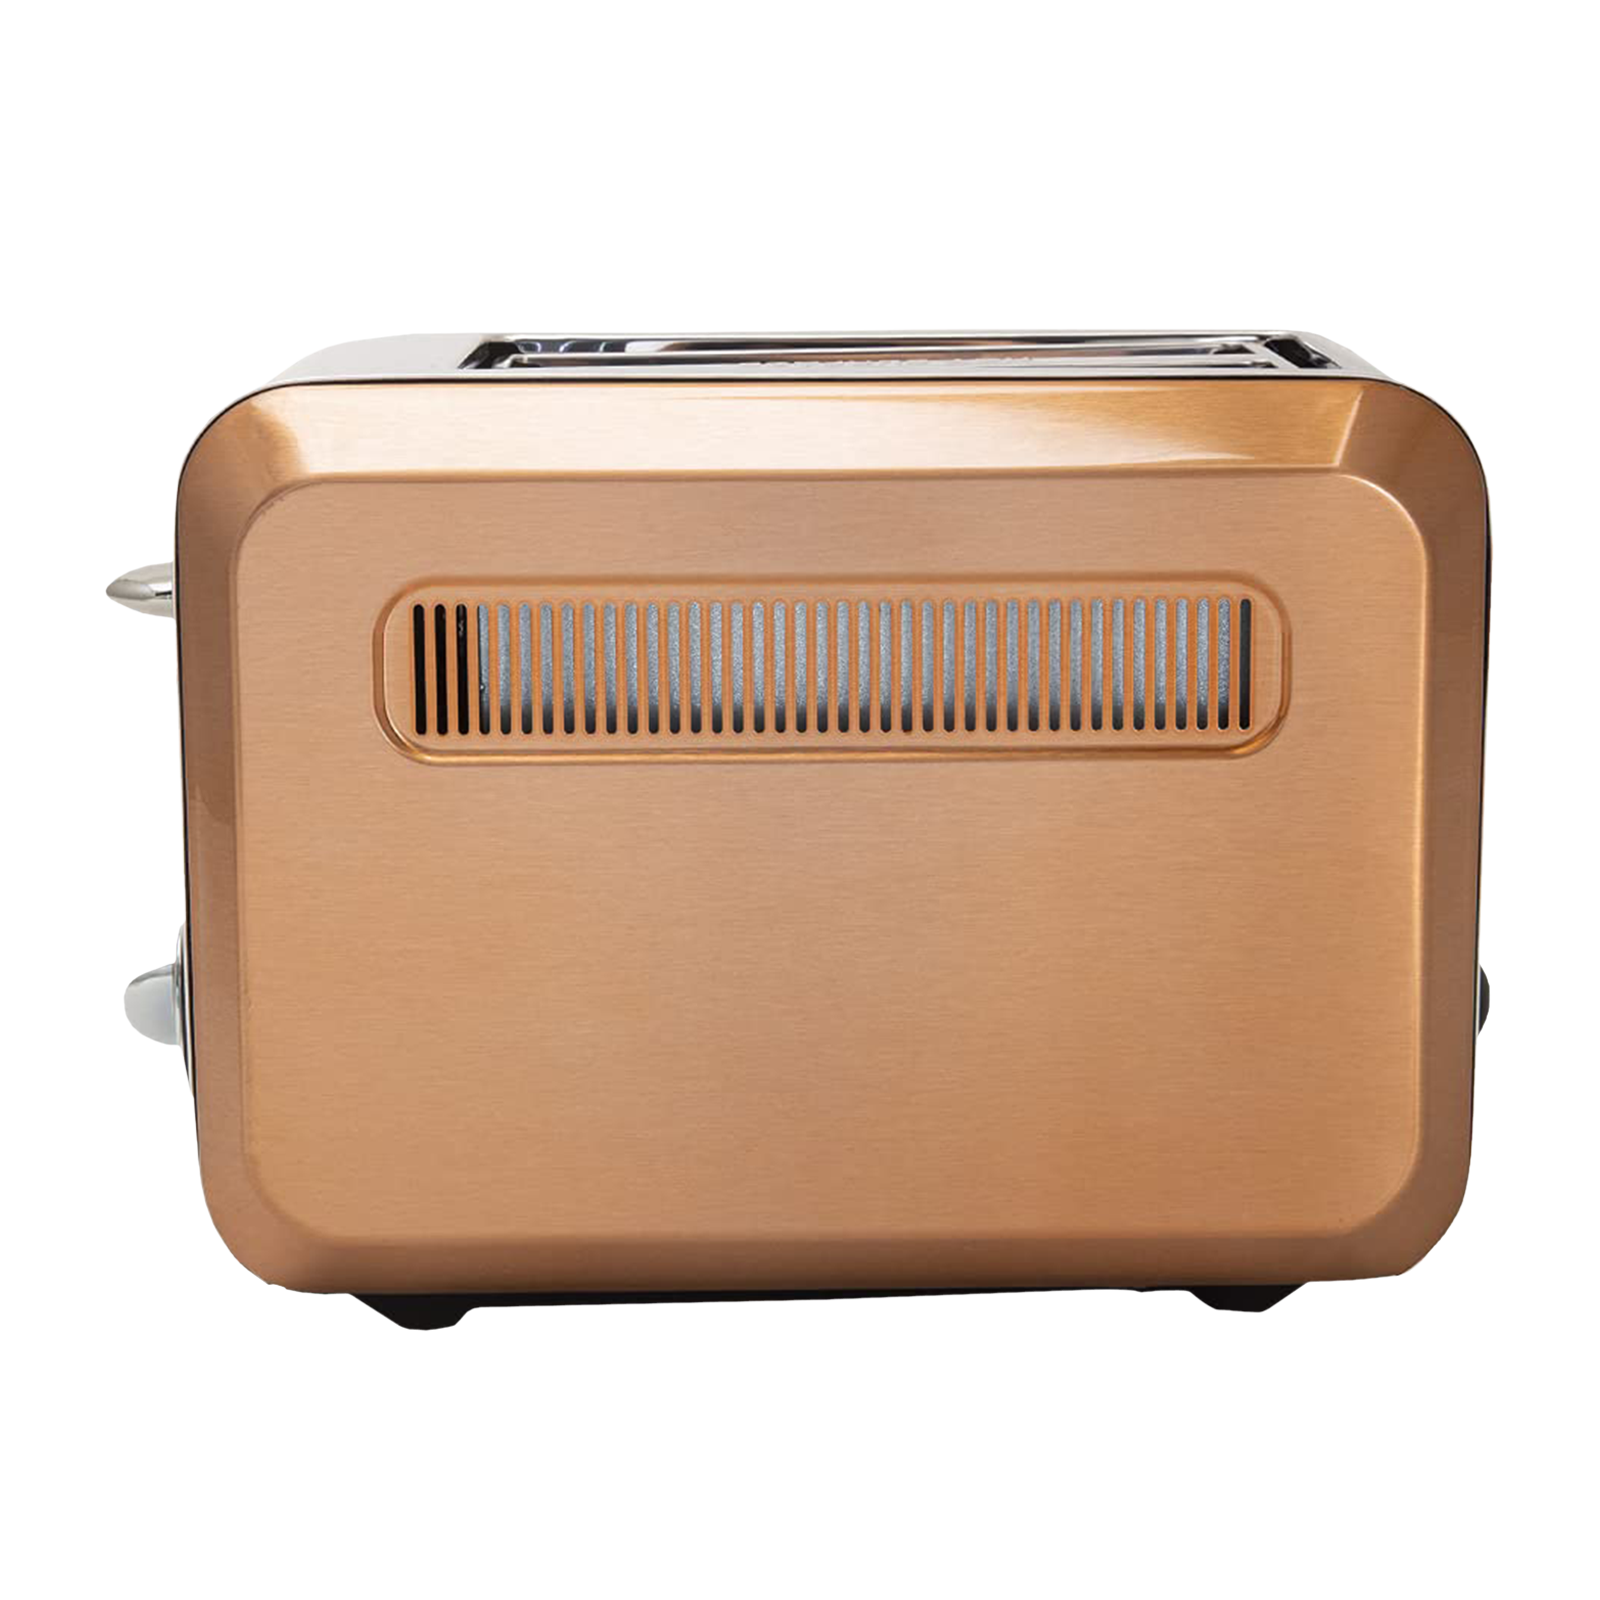 Haden Boston Pyramid 815 Watts 2 Slice Automatic Pop-up Toaster (Browning Control, 189738-R, Copper)_1